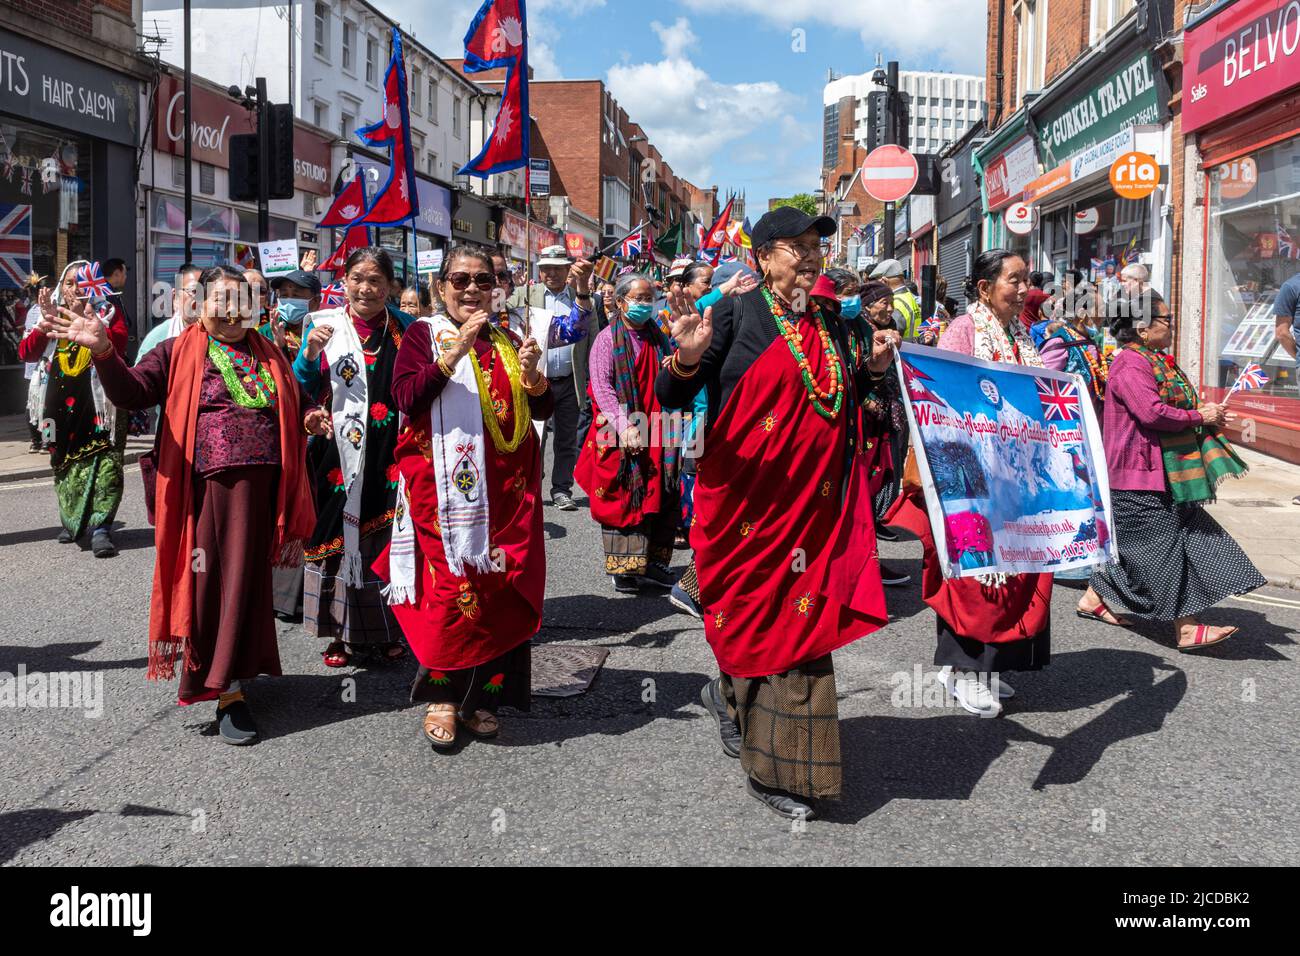 Nepali people, Nepalese Help Maddhat Shamua organisation in the Grand Parade at Victoria Day, an annual event in Aldershot, Hampshire, England, UK Stock Photo